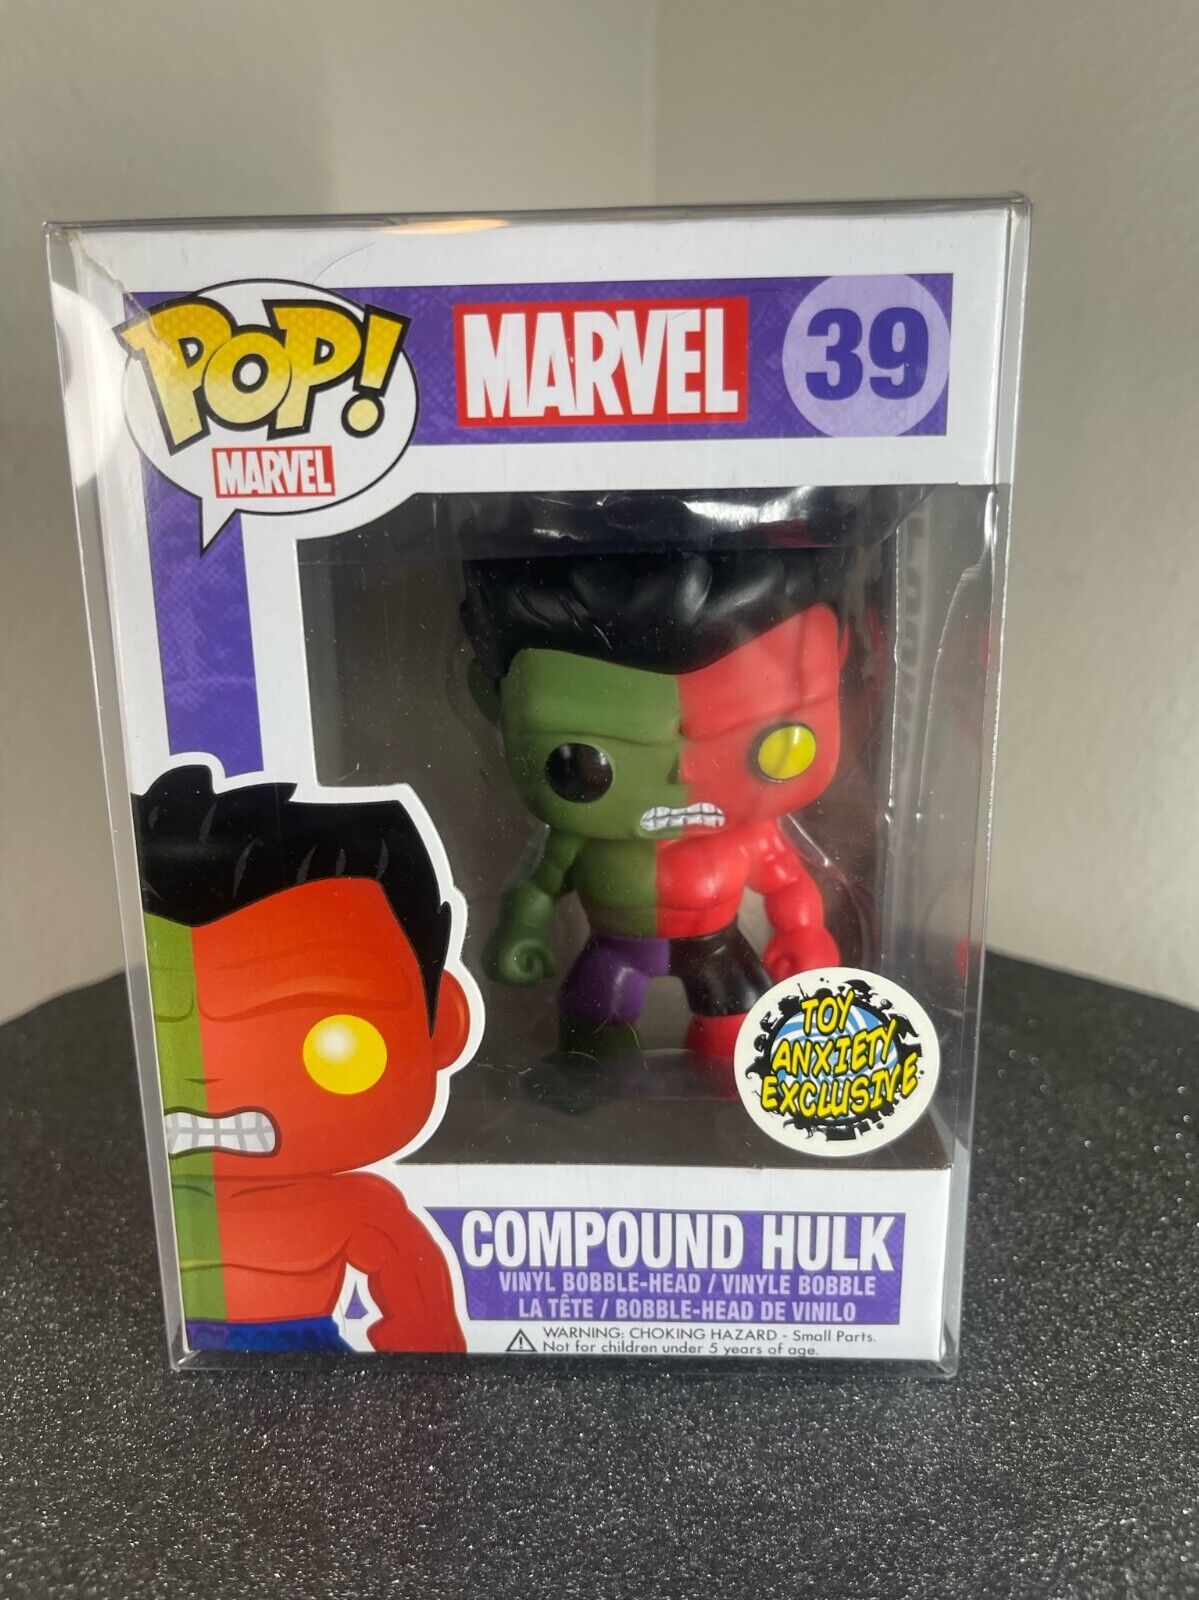 Funko Pop Marvel #39 COMPOUND HULK from Hulk Toy Anxiety Exclusive